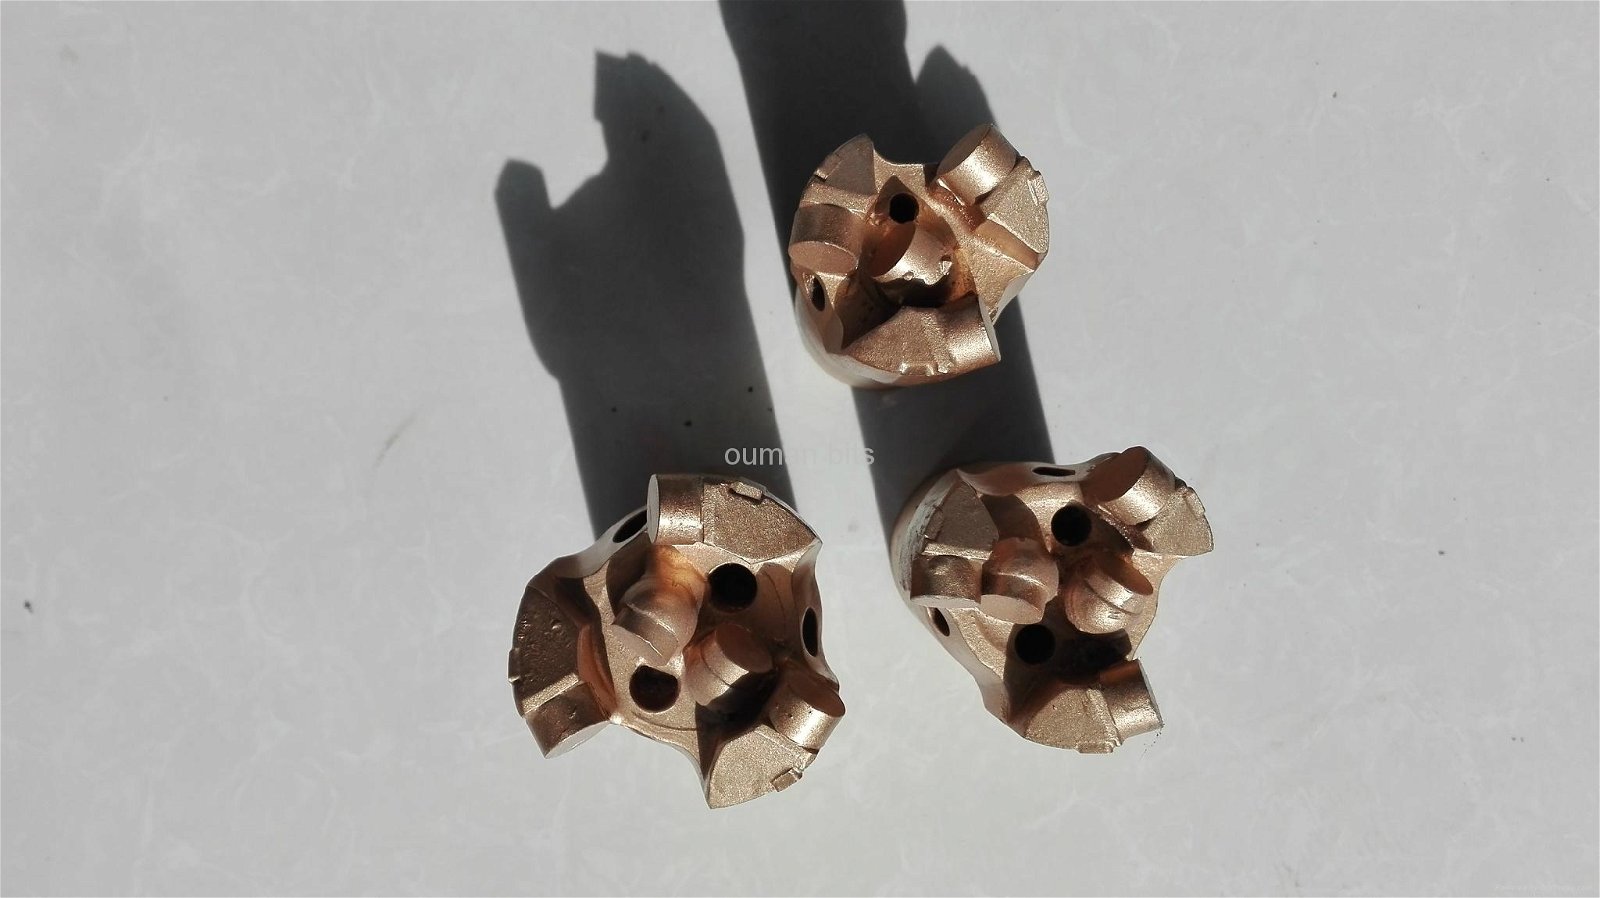 76mm PDC bit for drilling water well 4